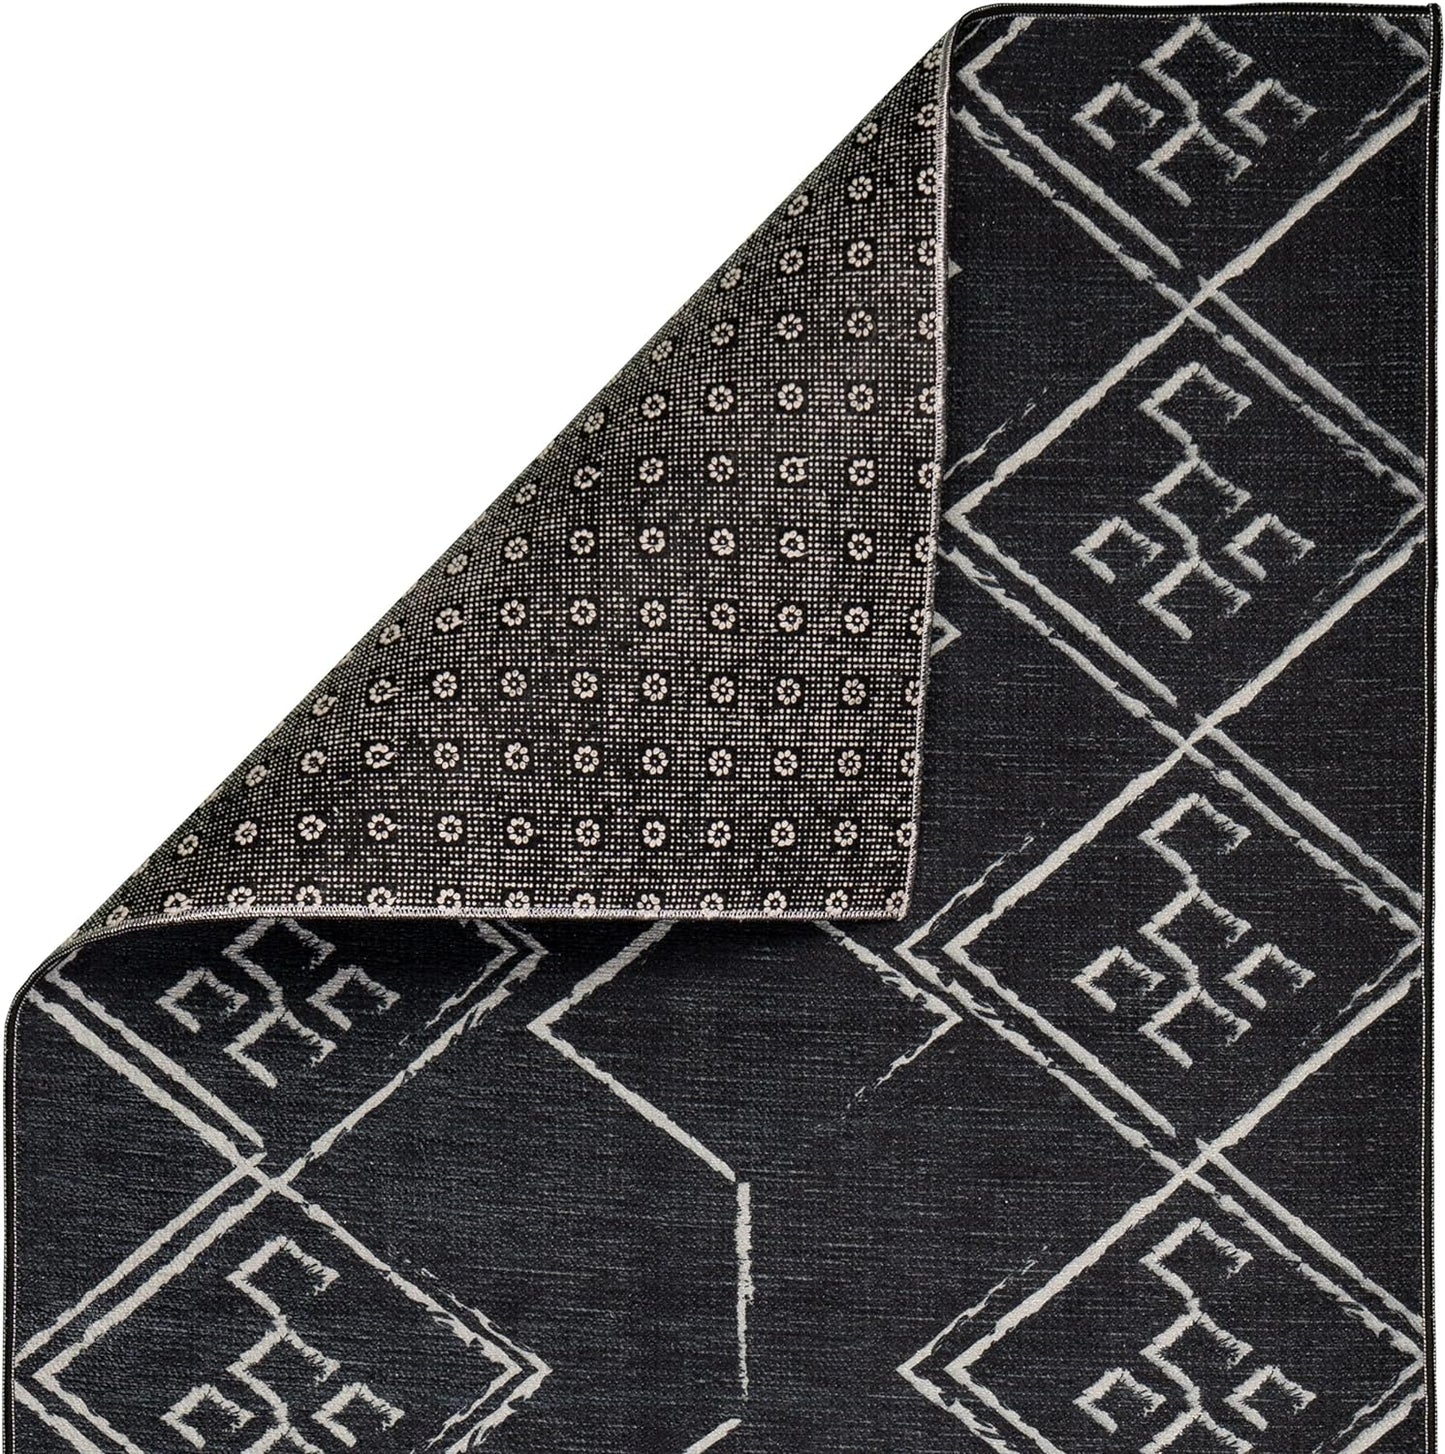 Playa Rug Machine Washable Area Rug With Non Slip Backing - Stain Resistant - Eco Friendly - Family and Pet Friendly - Aspen Tribal Moroccan Bohemian Black&Creme Design